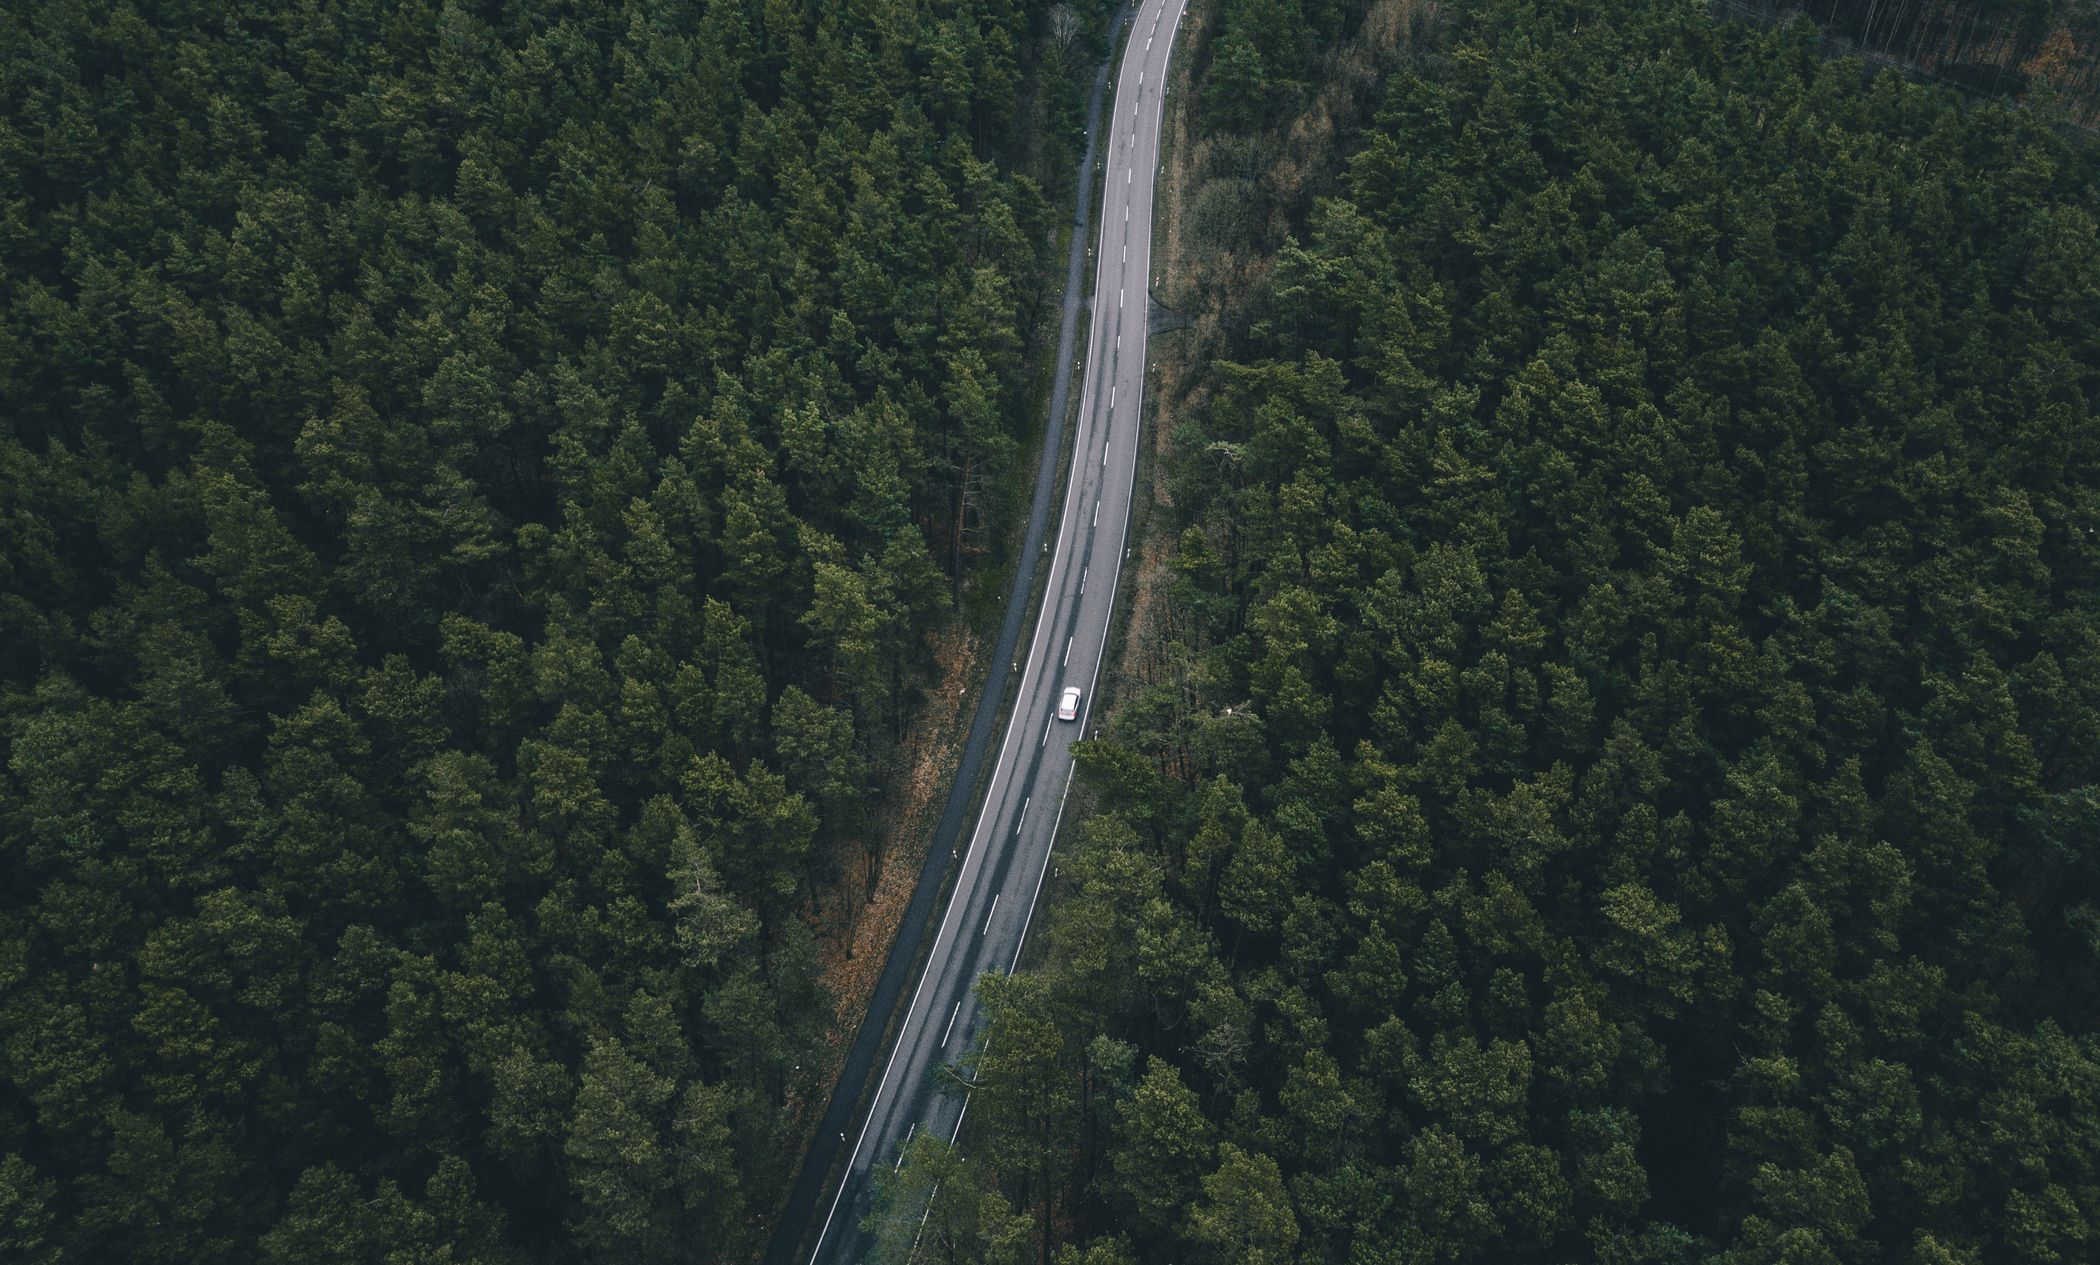 Long road through the forest from above